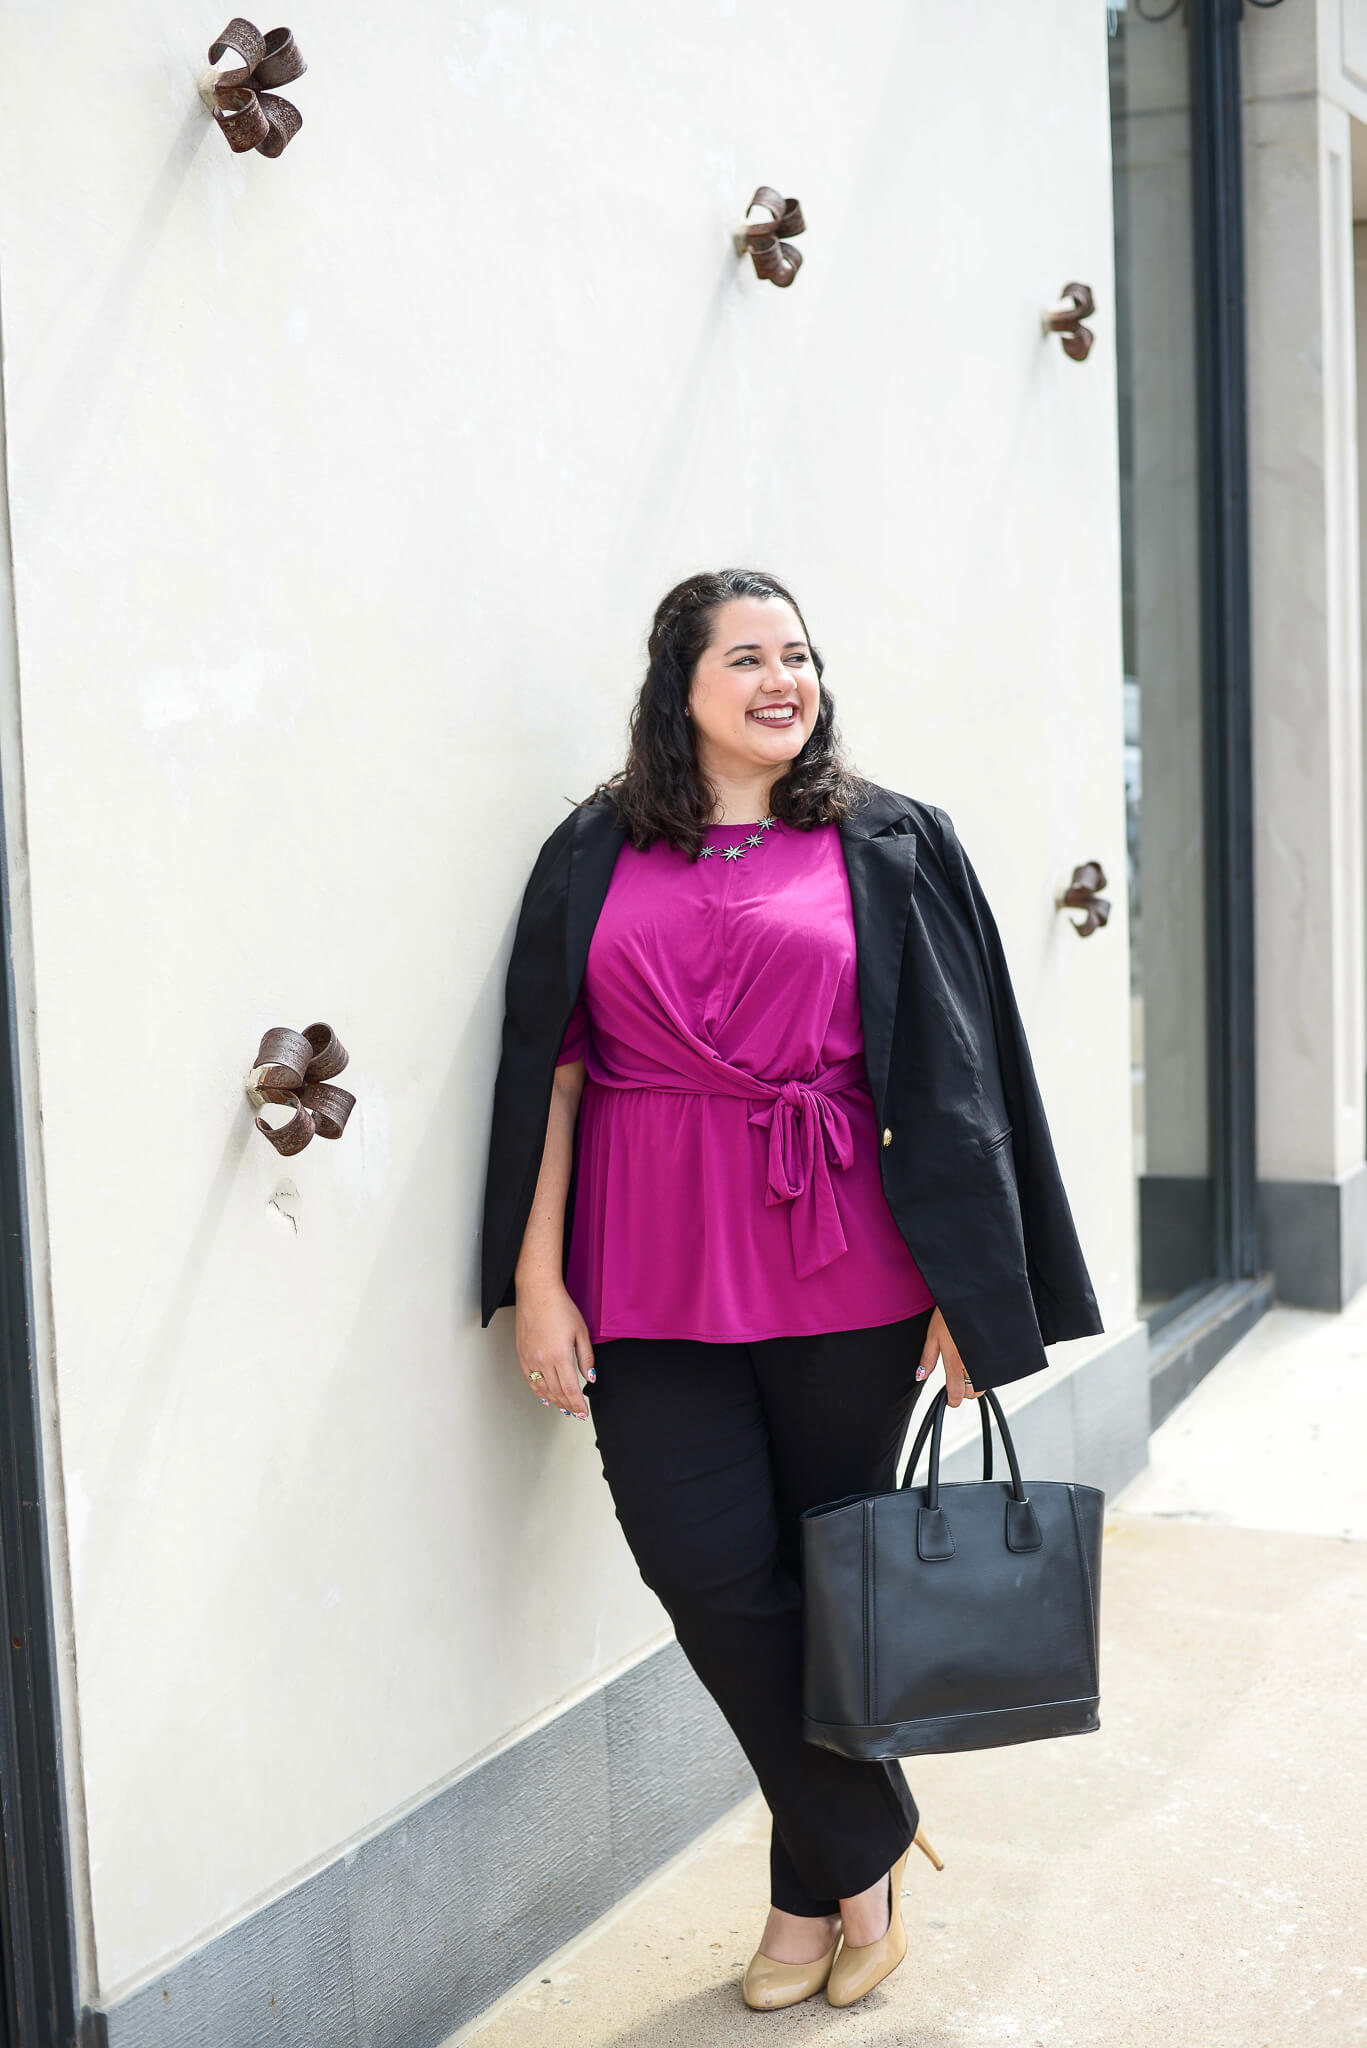 Wearing business casual to the office every day doesn't have to be boring. I'm sharing one of my biggest tips for showing your personality at the office - wearing color - with the help of Lane Bryant. 